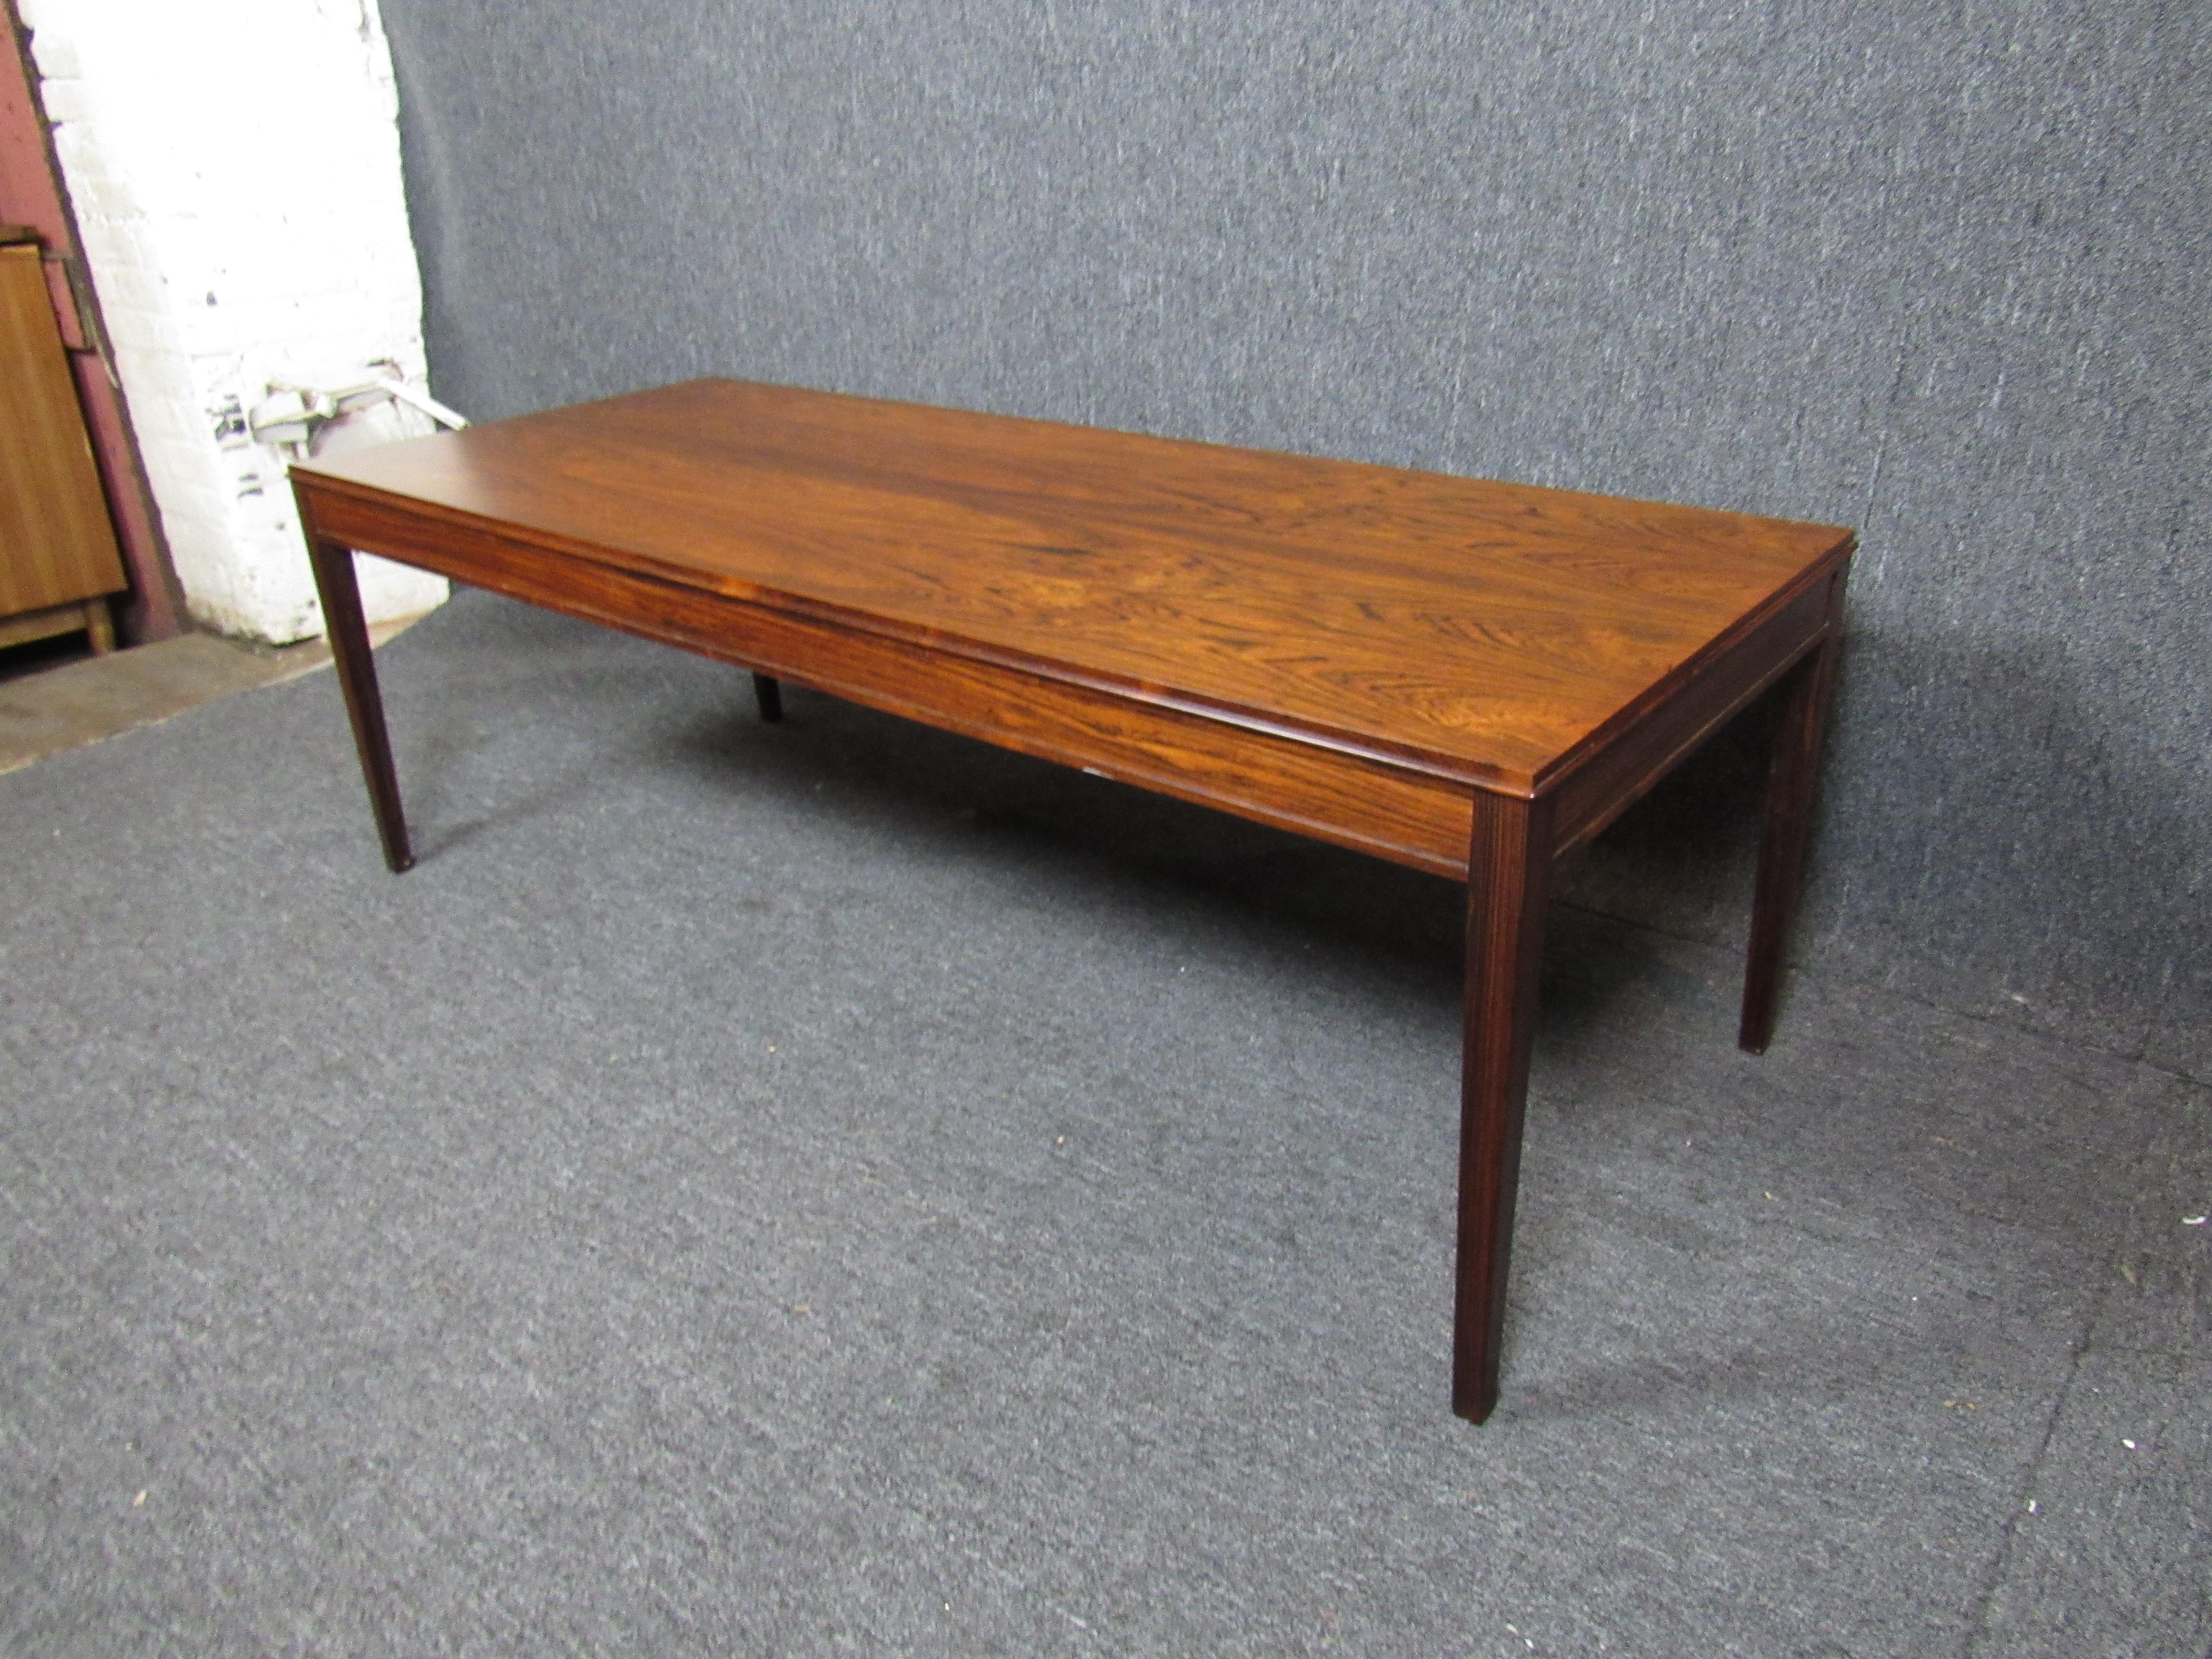 Absolutely stunning mid-century rosewood coffee table. A large tabletop, bold lines, and tapered legs show off the wood grain's natural colors and beauty. A perfect addition for any home or office. 

Please confirm location NY or NJ.